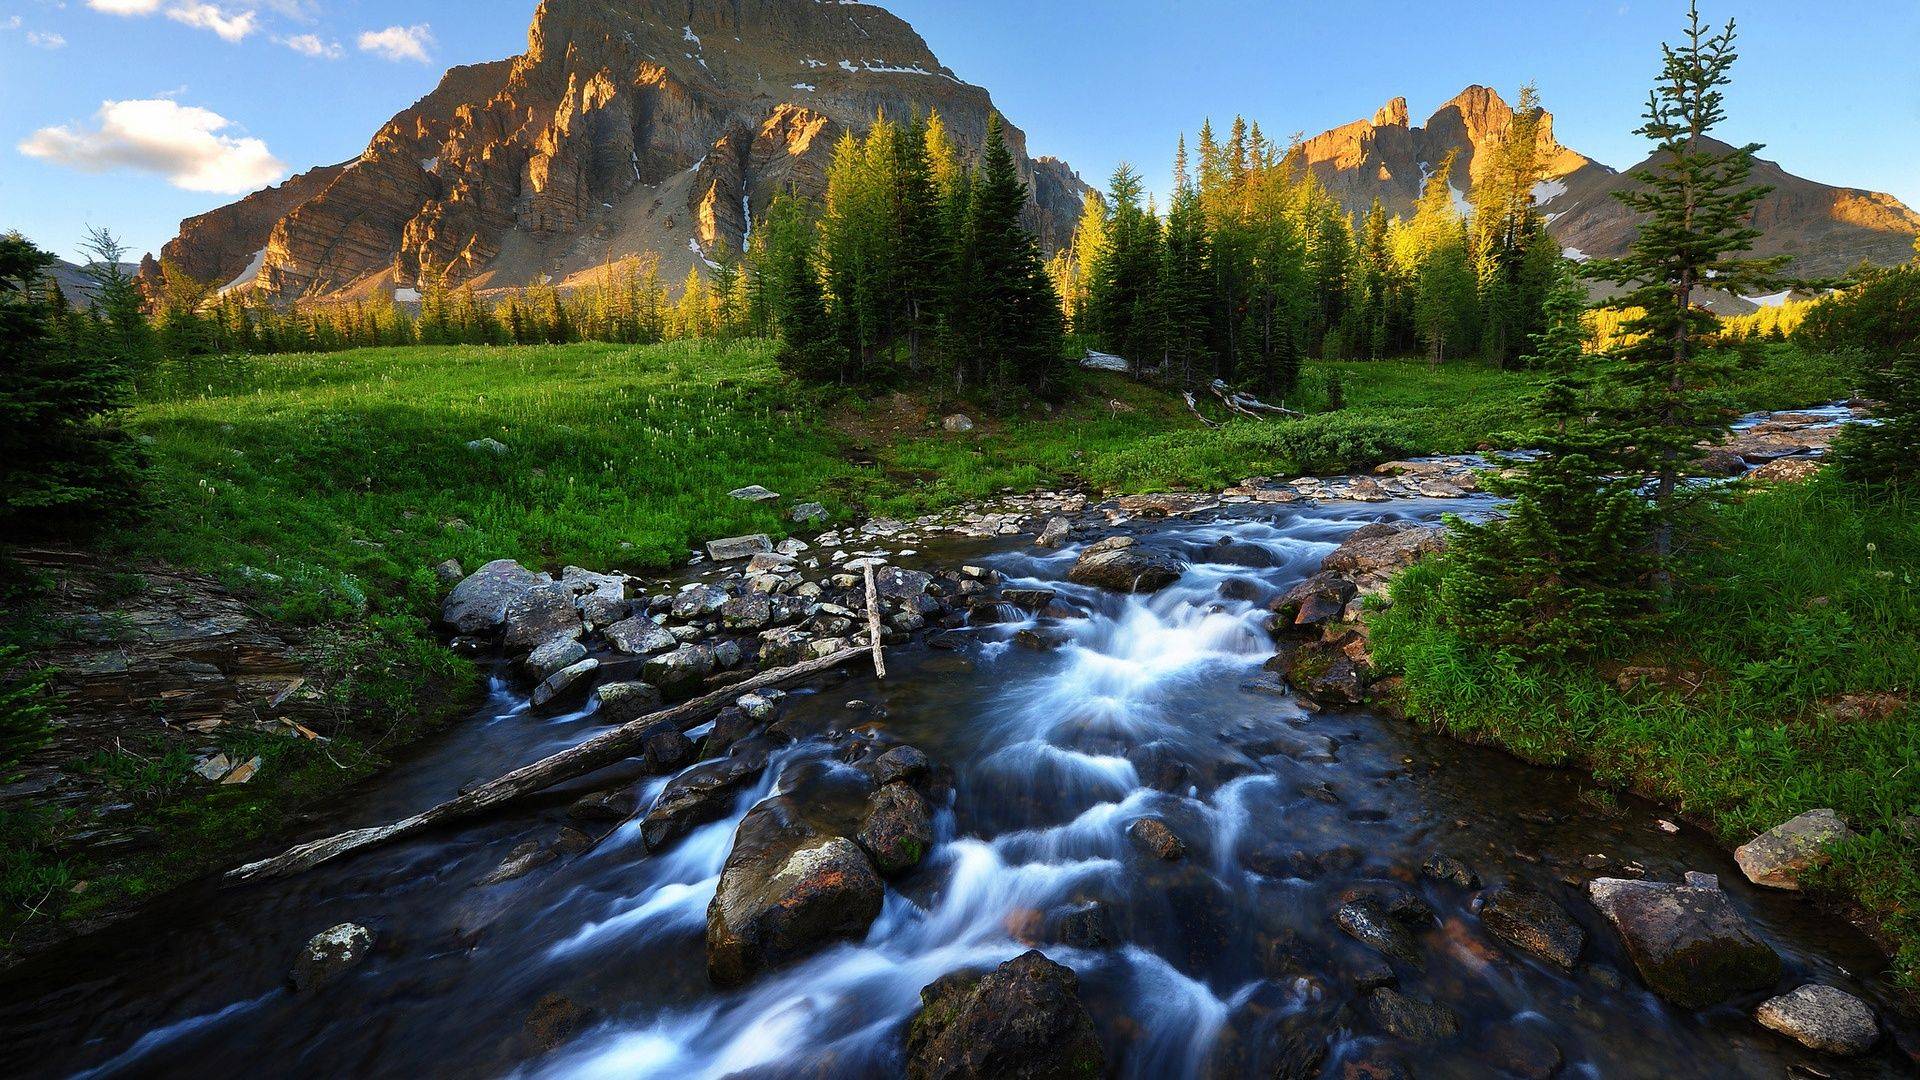 1920x1080 Beautiful River Wallpapers | Landscape wallpaper, Cool pictures of nature, Beautiful nature